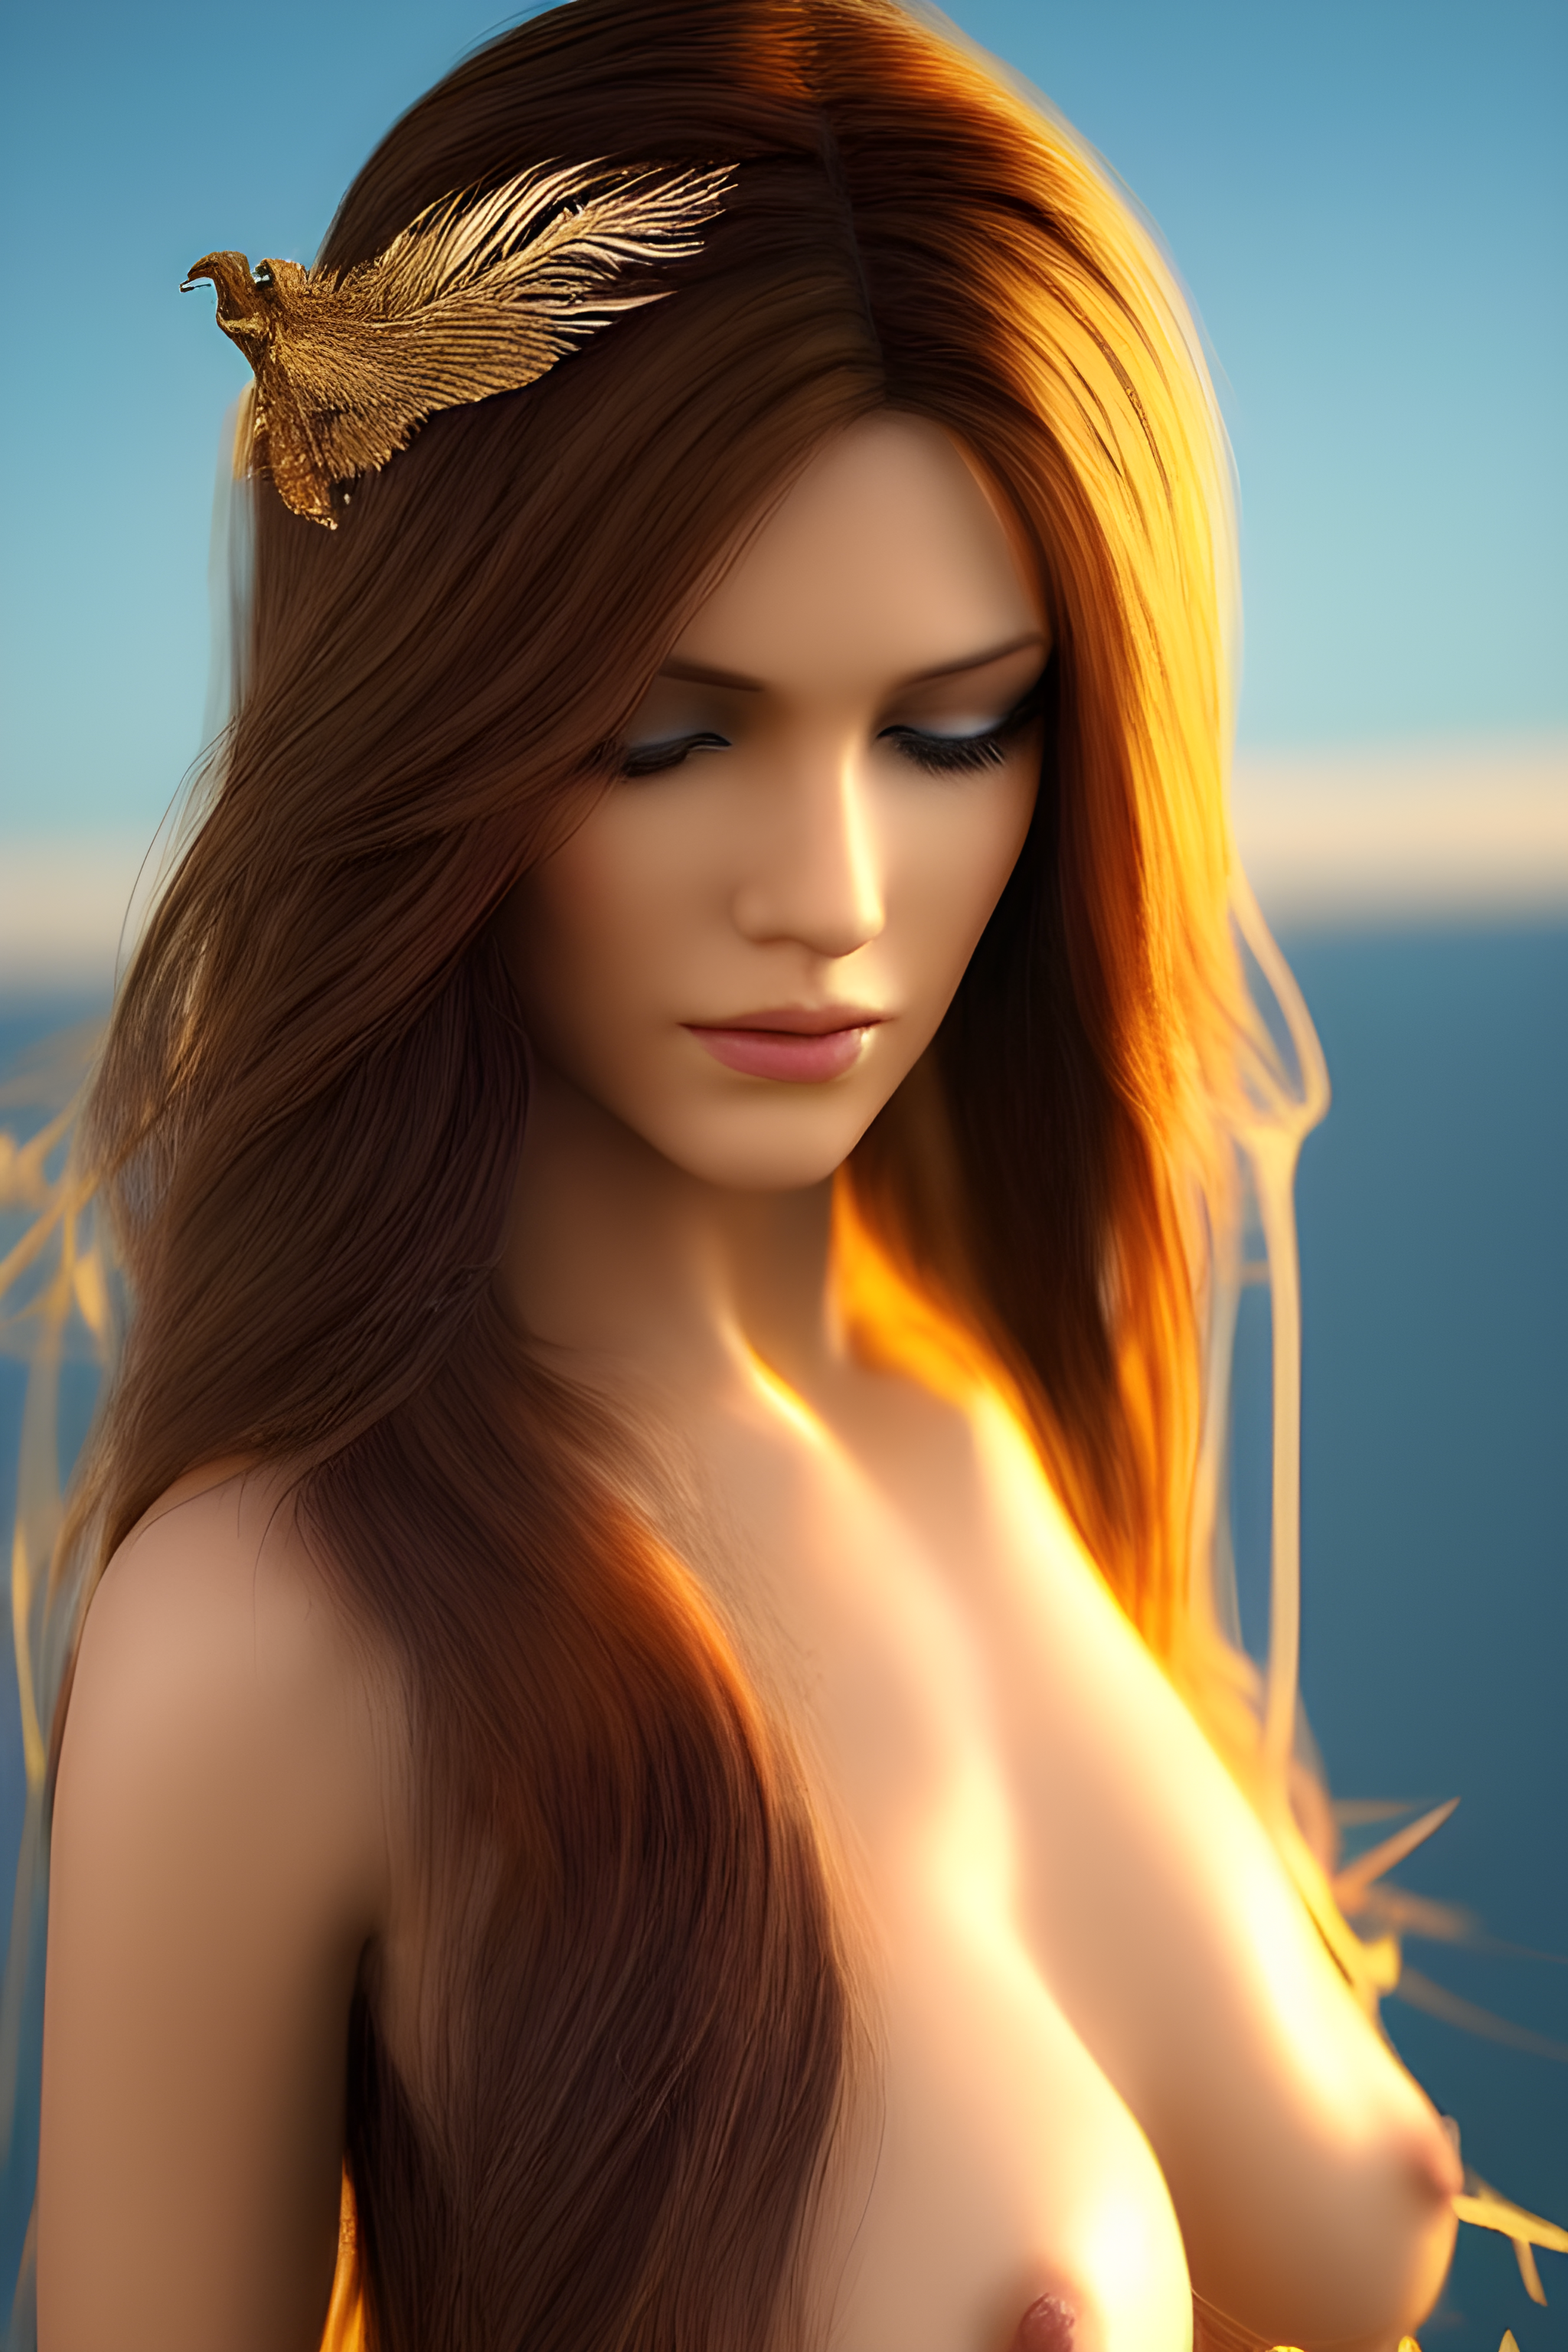 Naked_woman_with_long_hair_brown__wings_with_the_golden_reflections_of_light__feathers_falling...png